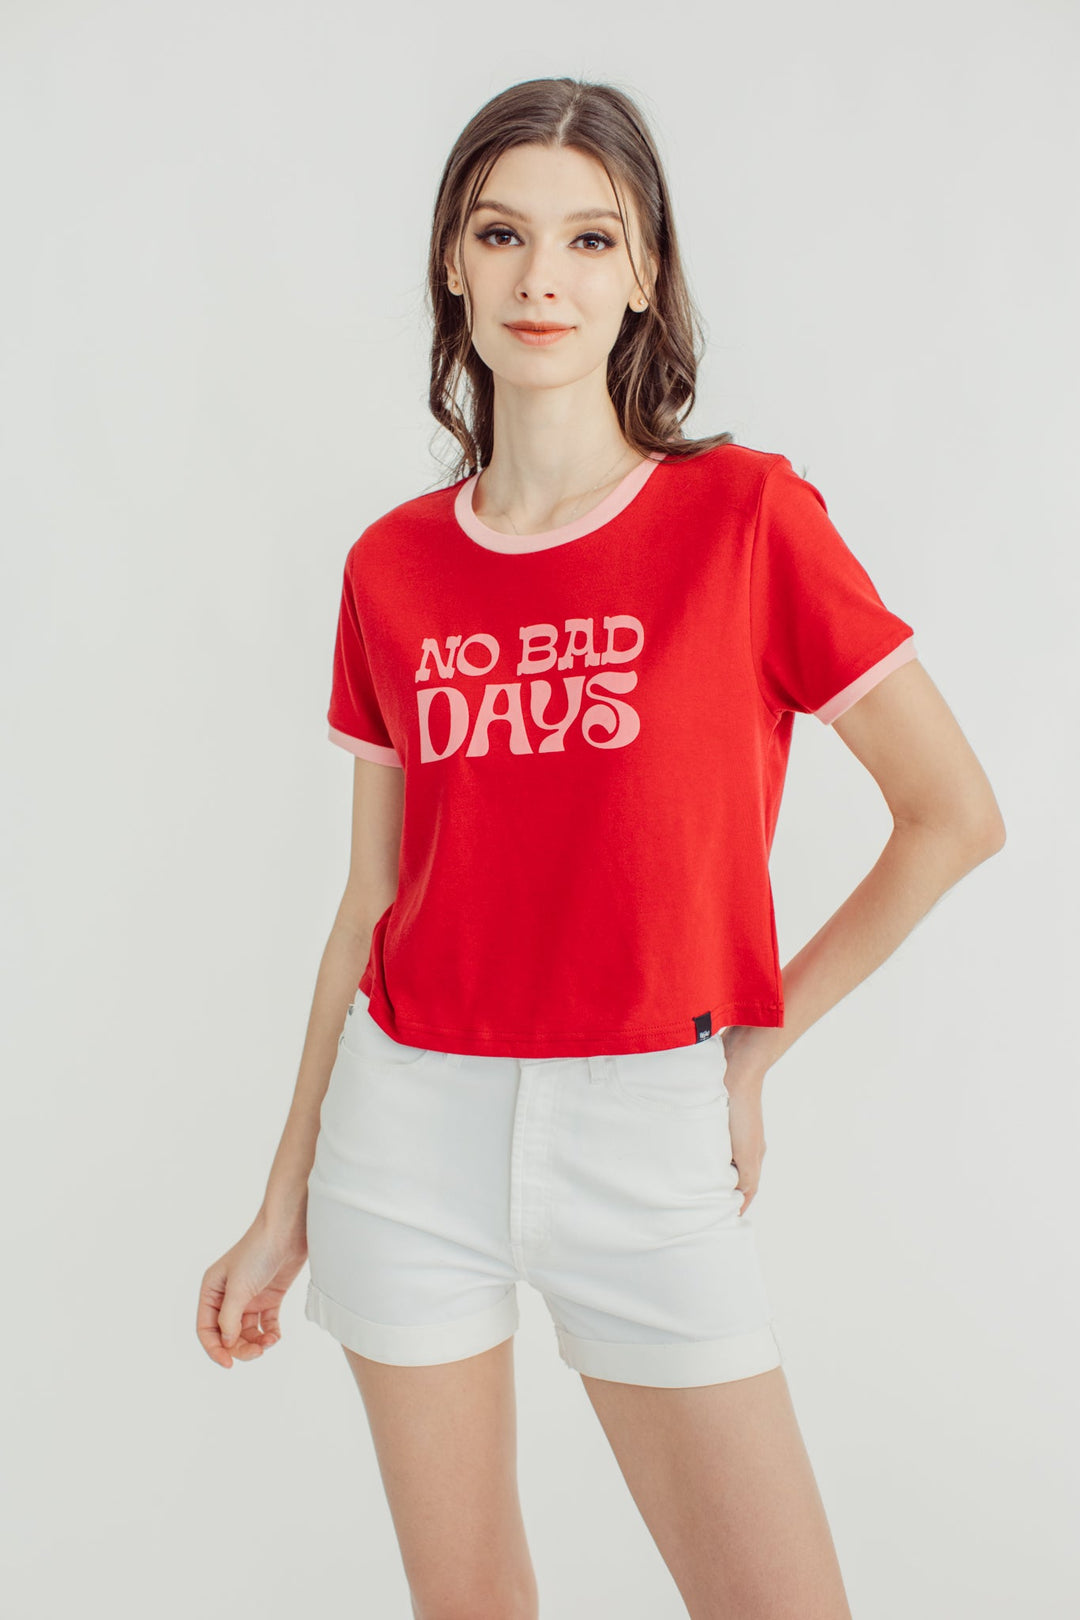 Rio Red with No Bad Days Statement on Ringer Classic Cropped Fit Tee - Mossimo PH